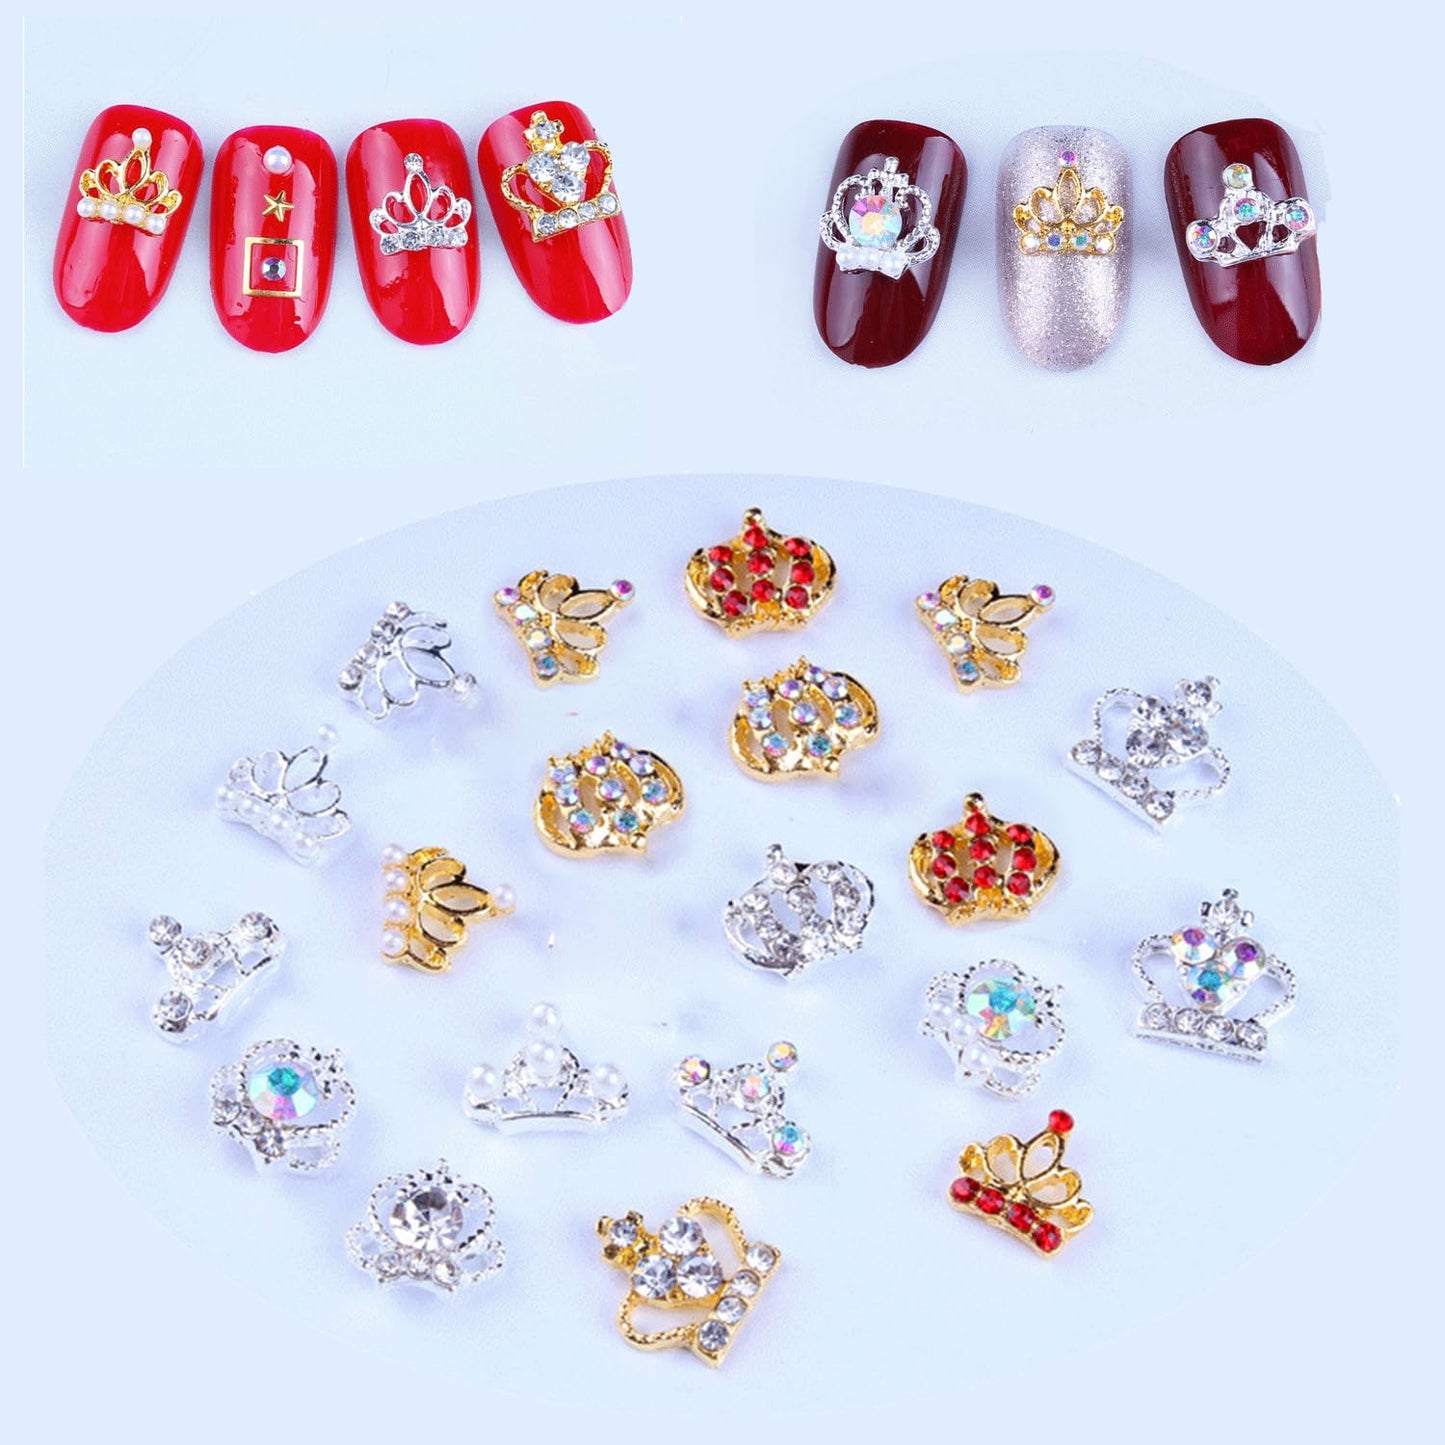 DANNEASY 34pcs 3D Crown Nail Charms Flat-back Crown Rhinestone for Nails Gold Silver Nail Jewels Crystal Charms for Nails Alloy Nail Studs Rivet Nail Art Decoration